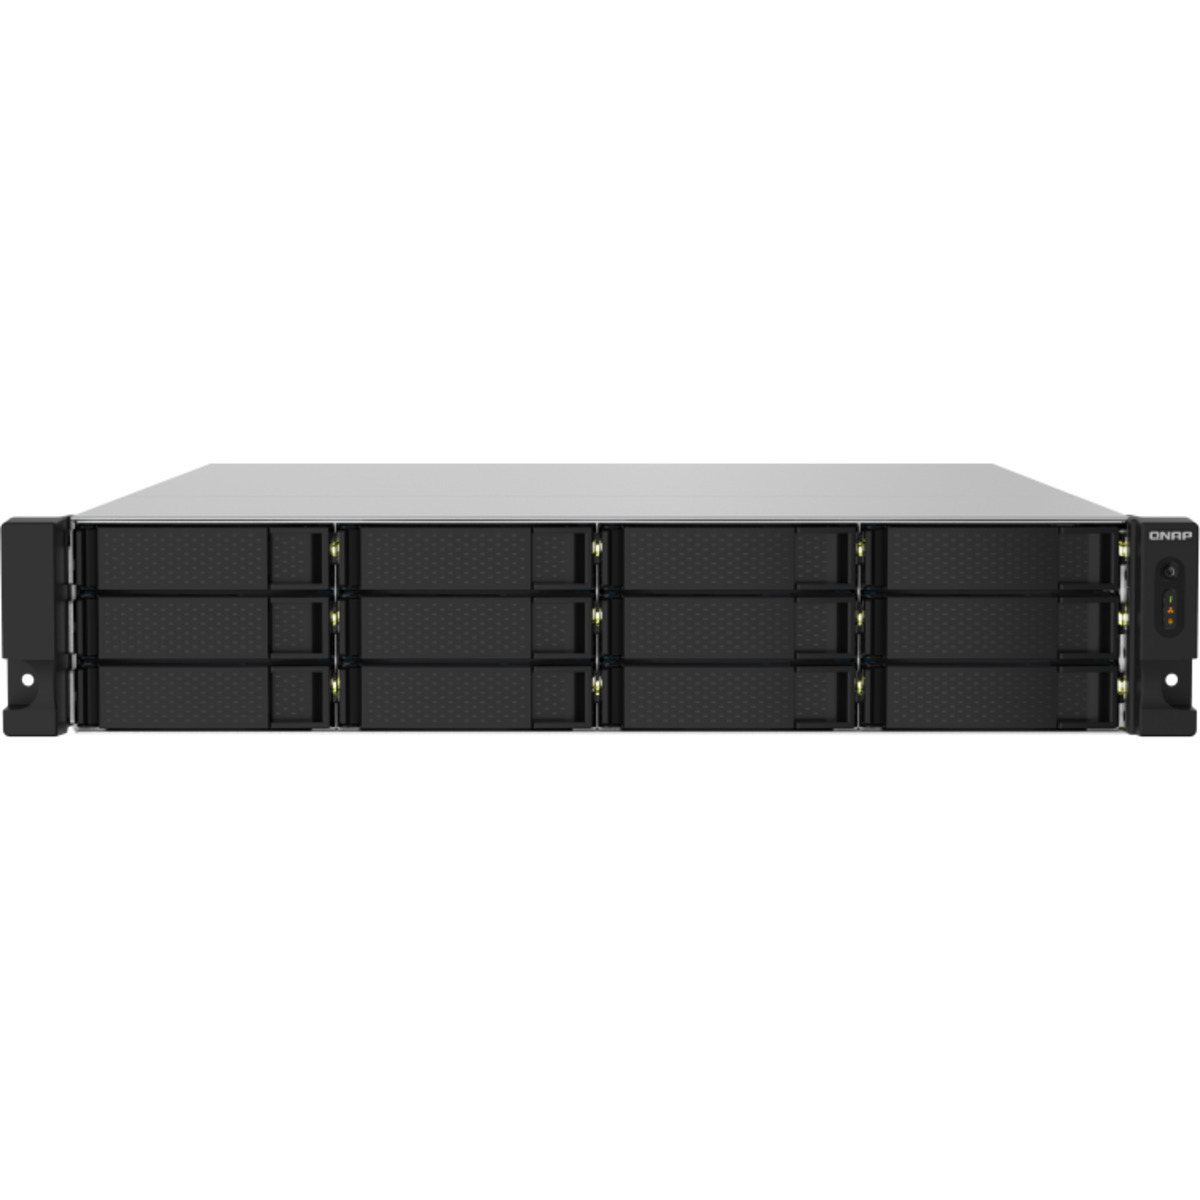 buy QNAP TS-1232PXU-RP 24tb RackMount NAS - Network Attached Storage Device 12x2000gb Seagate IronWolf Pro ST2000NT001 3.5 7200rpm SATA 6Gb/s HDD NAS Class Drives Installed - Burn-In Tested - FREE RAM UPGRADE - nas headquarters buy network attached storage server device das new raid-5 free shipping simply usa TS-1232PXU-RP